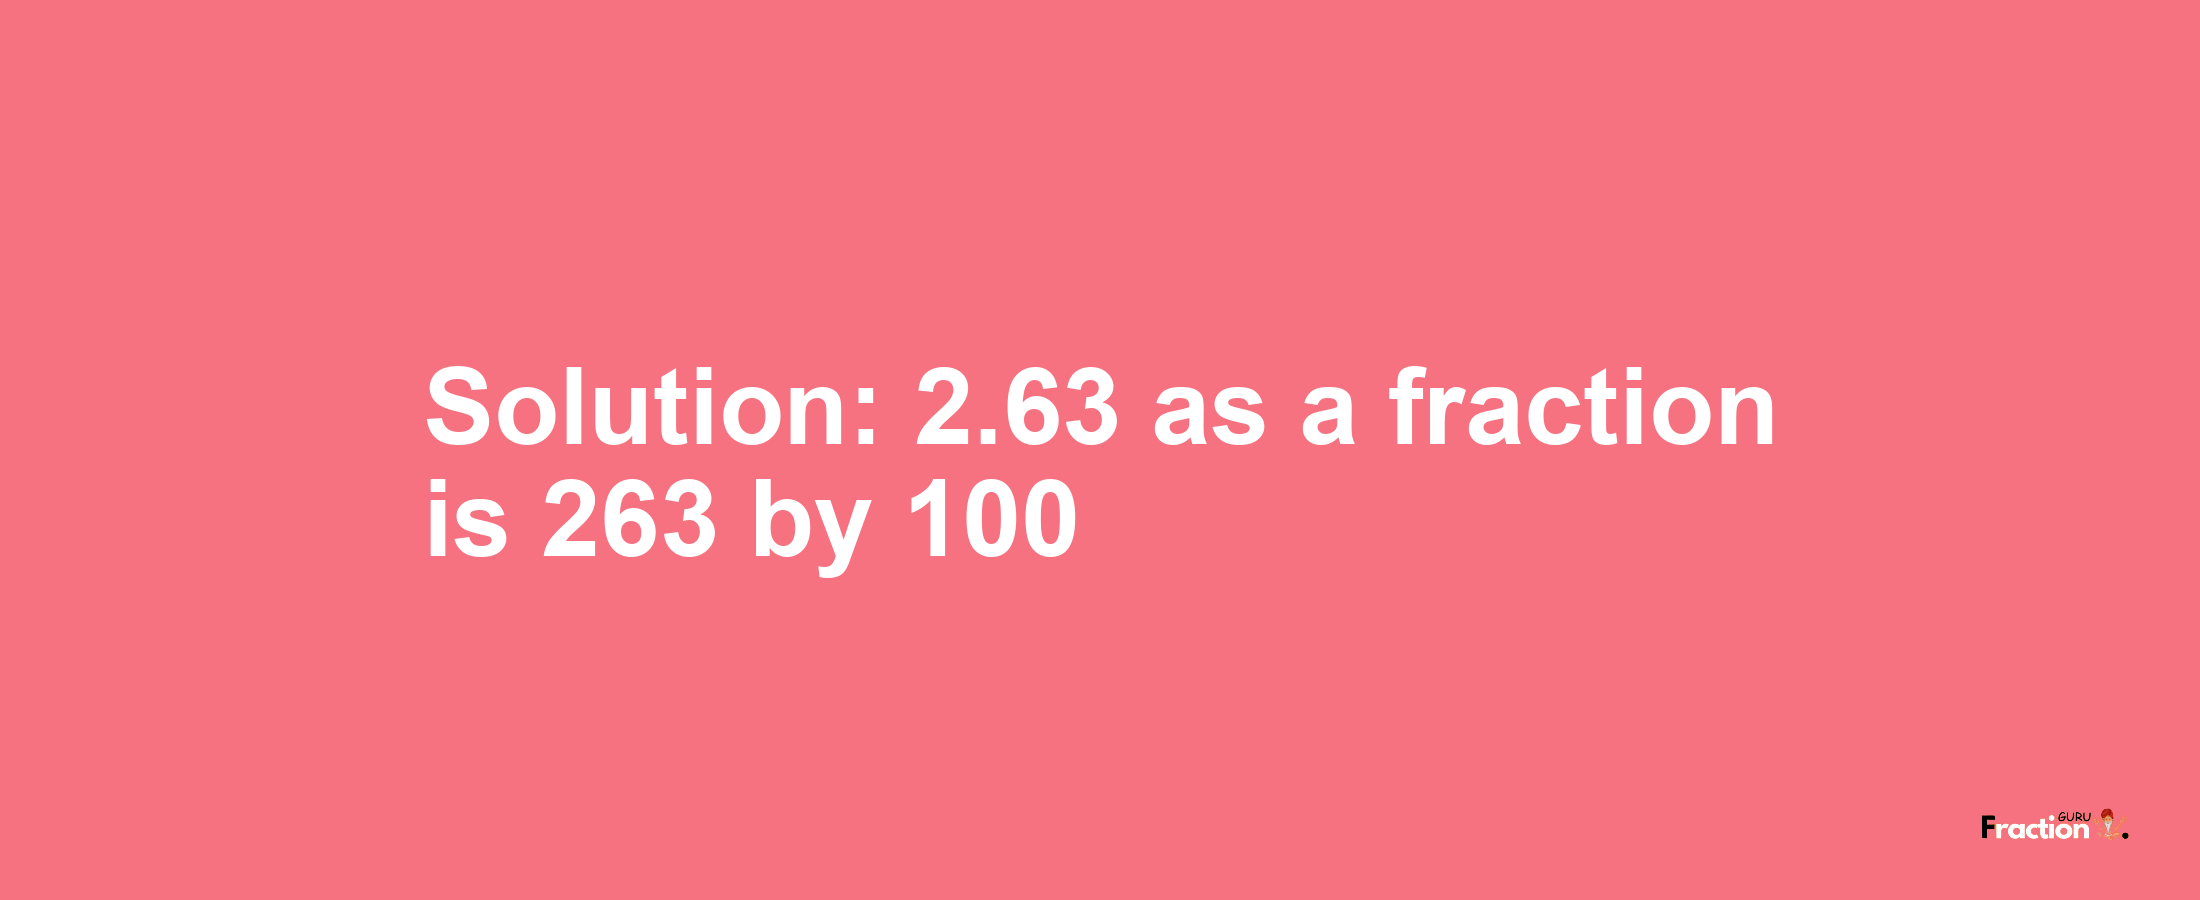 Solution:2.63 as a fraction is 263/100